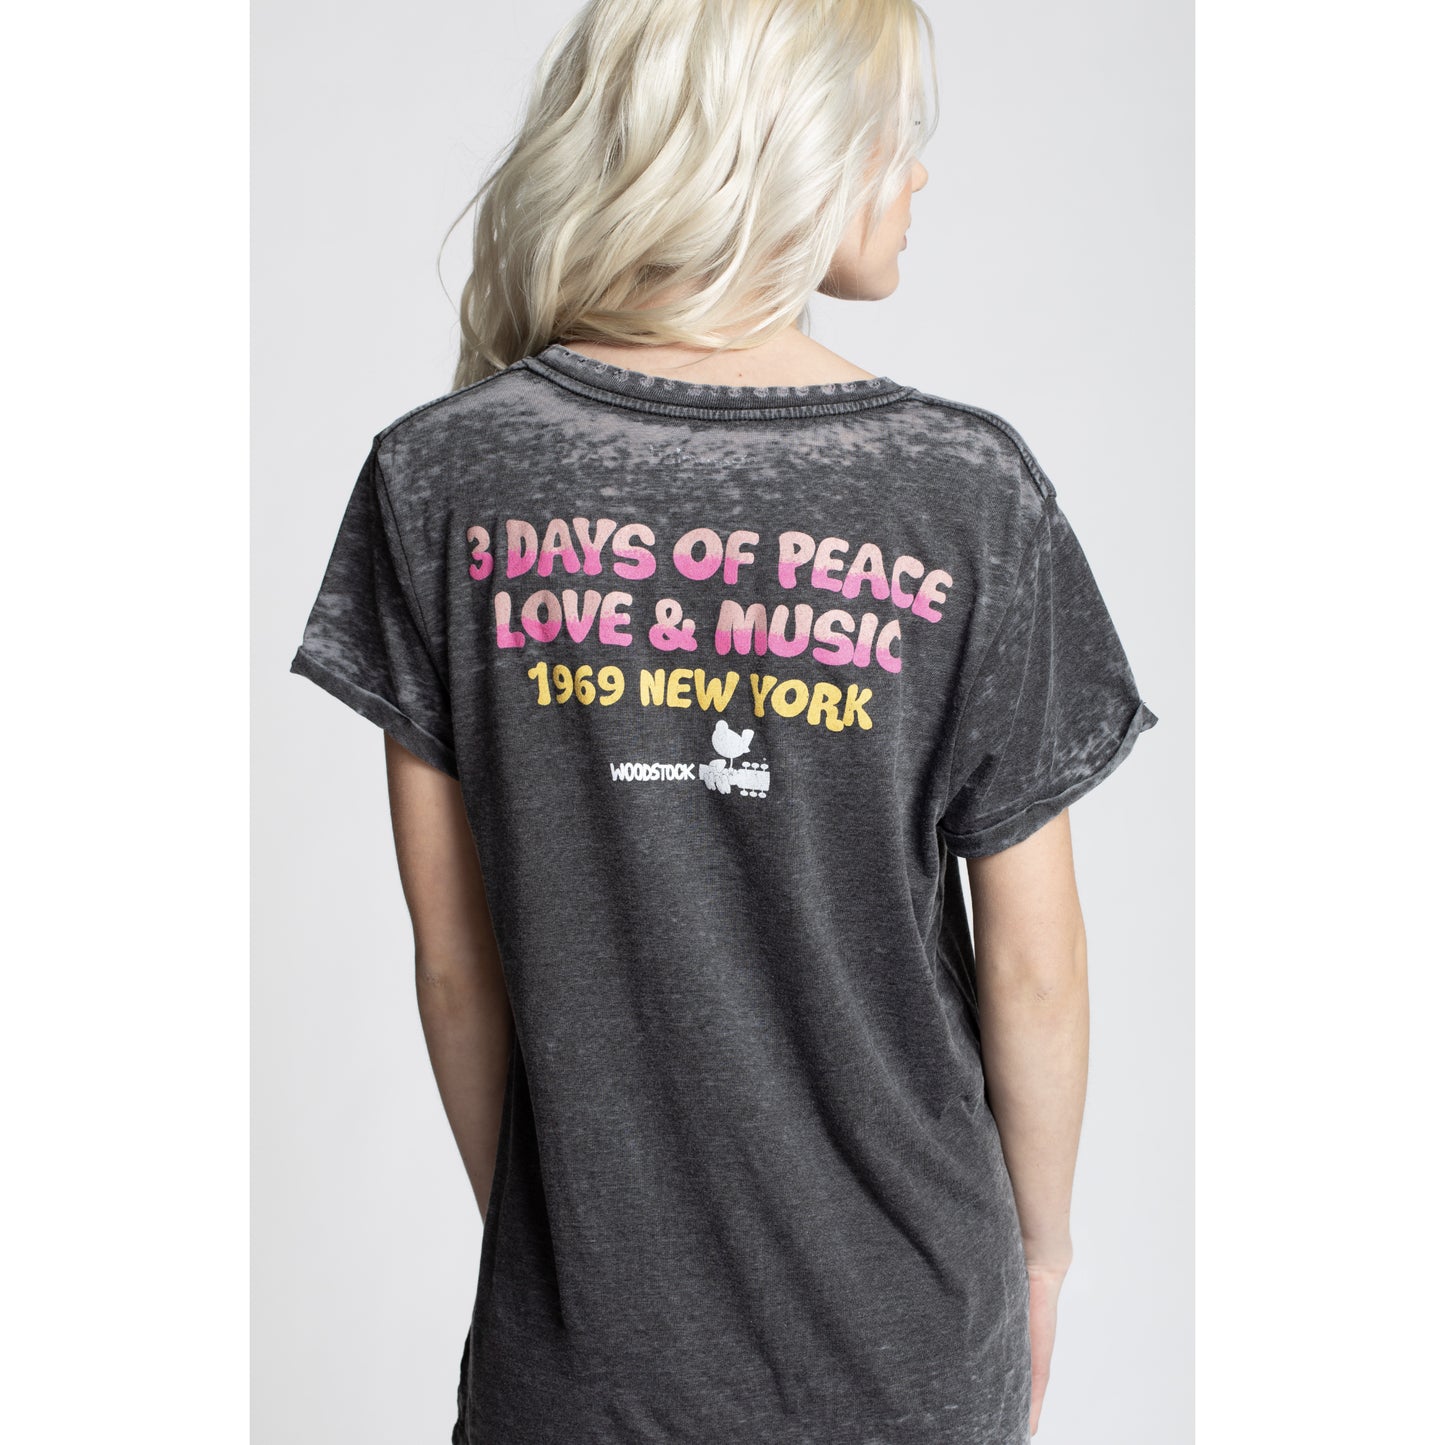 Recycled Karma Woodstock Peace Love & Music Burnout Tee available at The Good Life Boutique